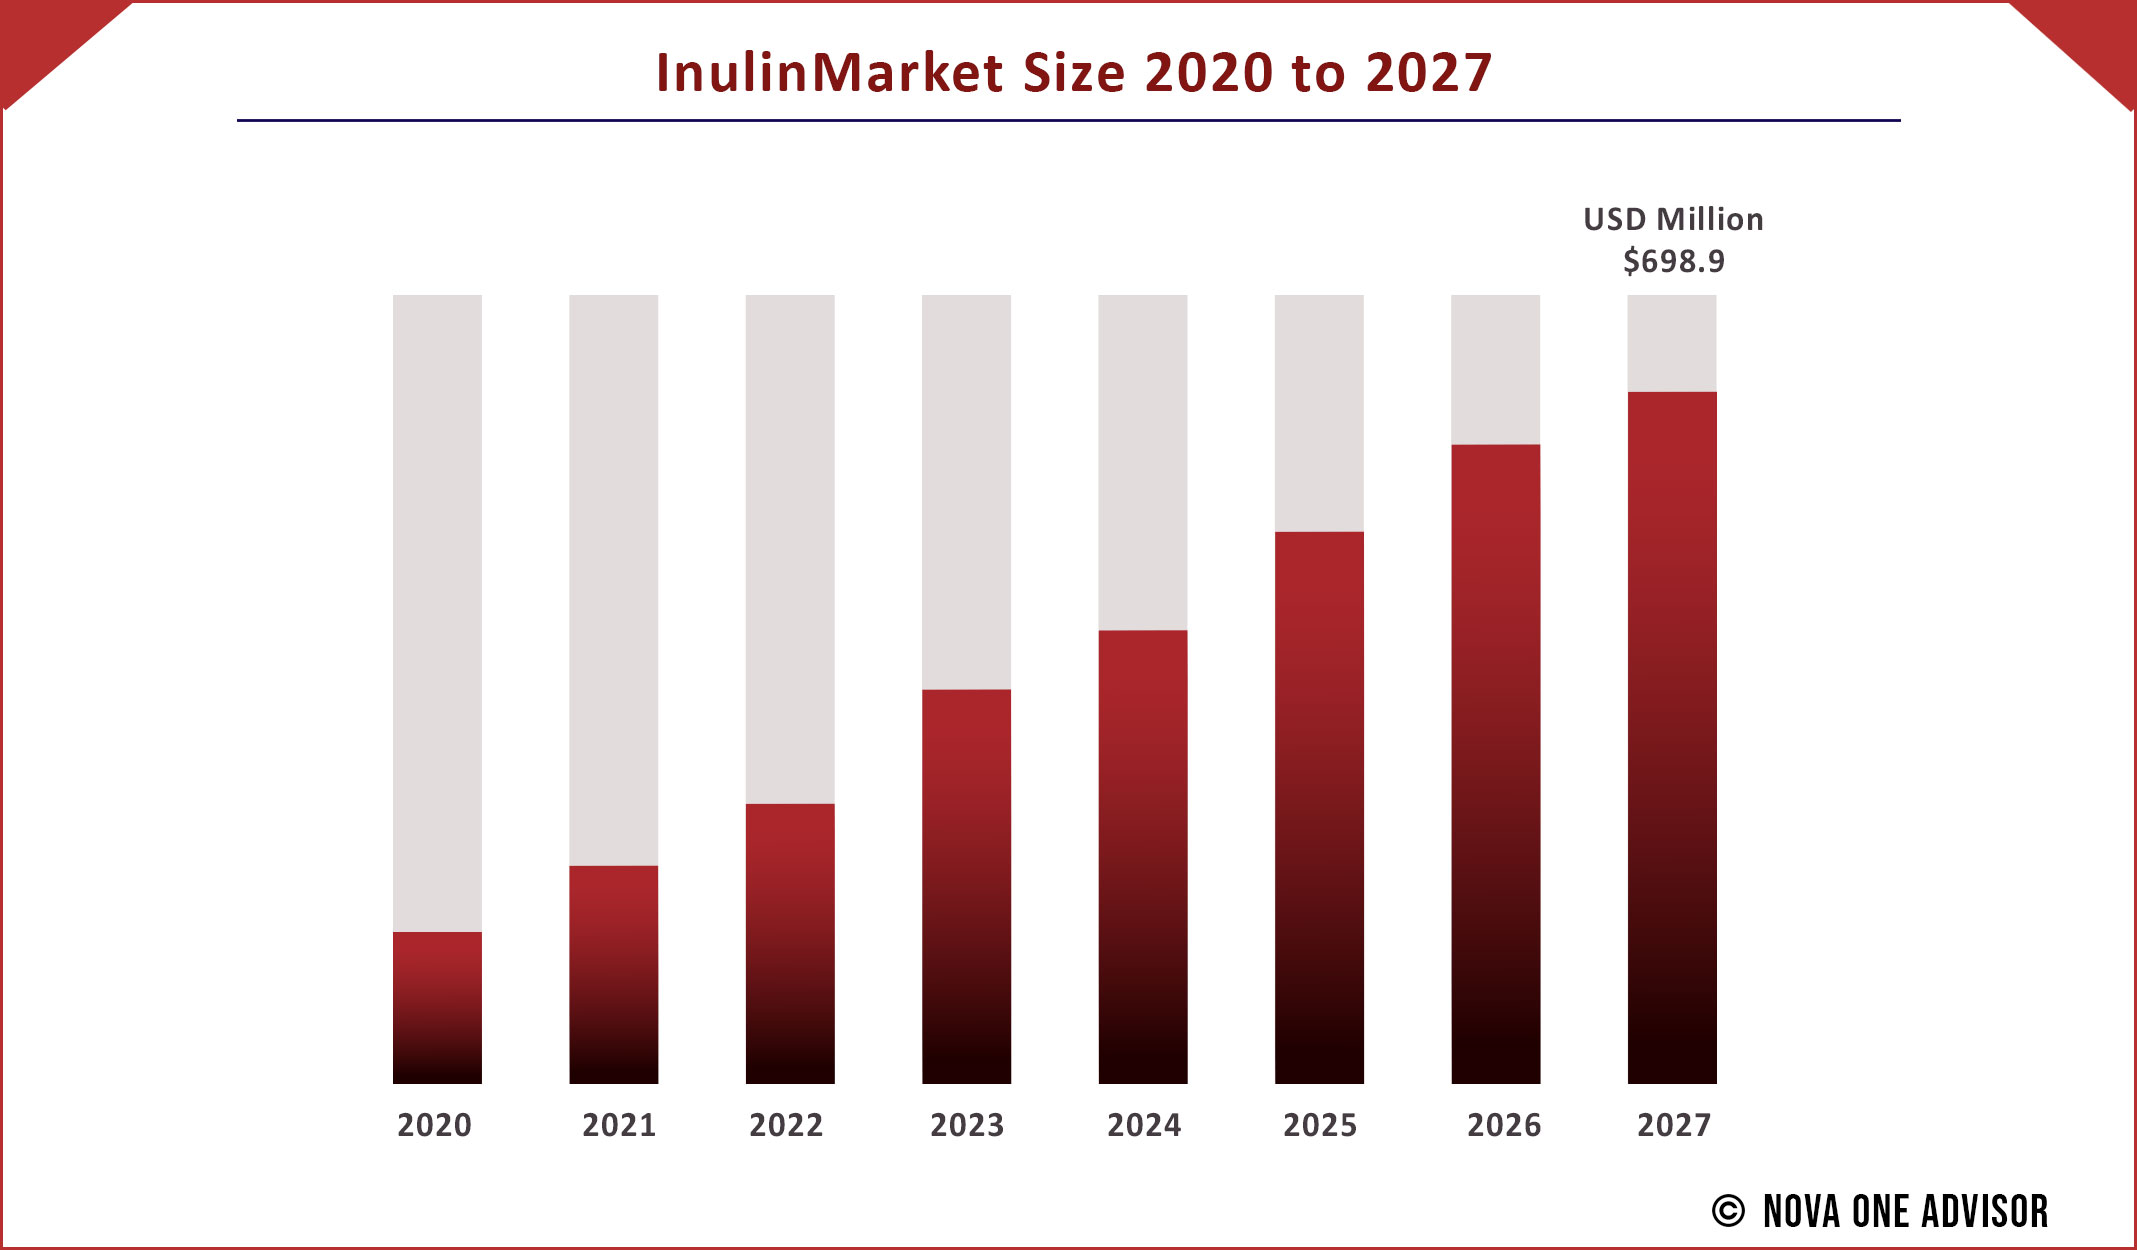 Inulin Market Size 2020 to 2027